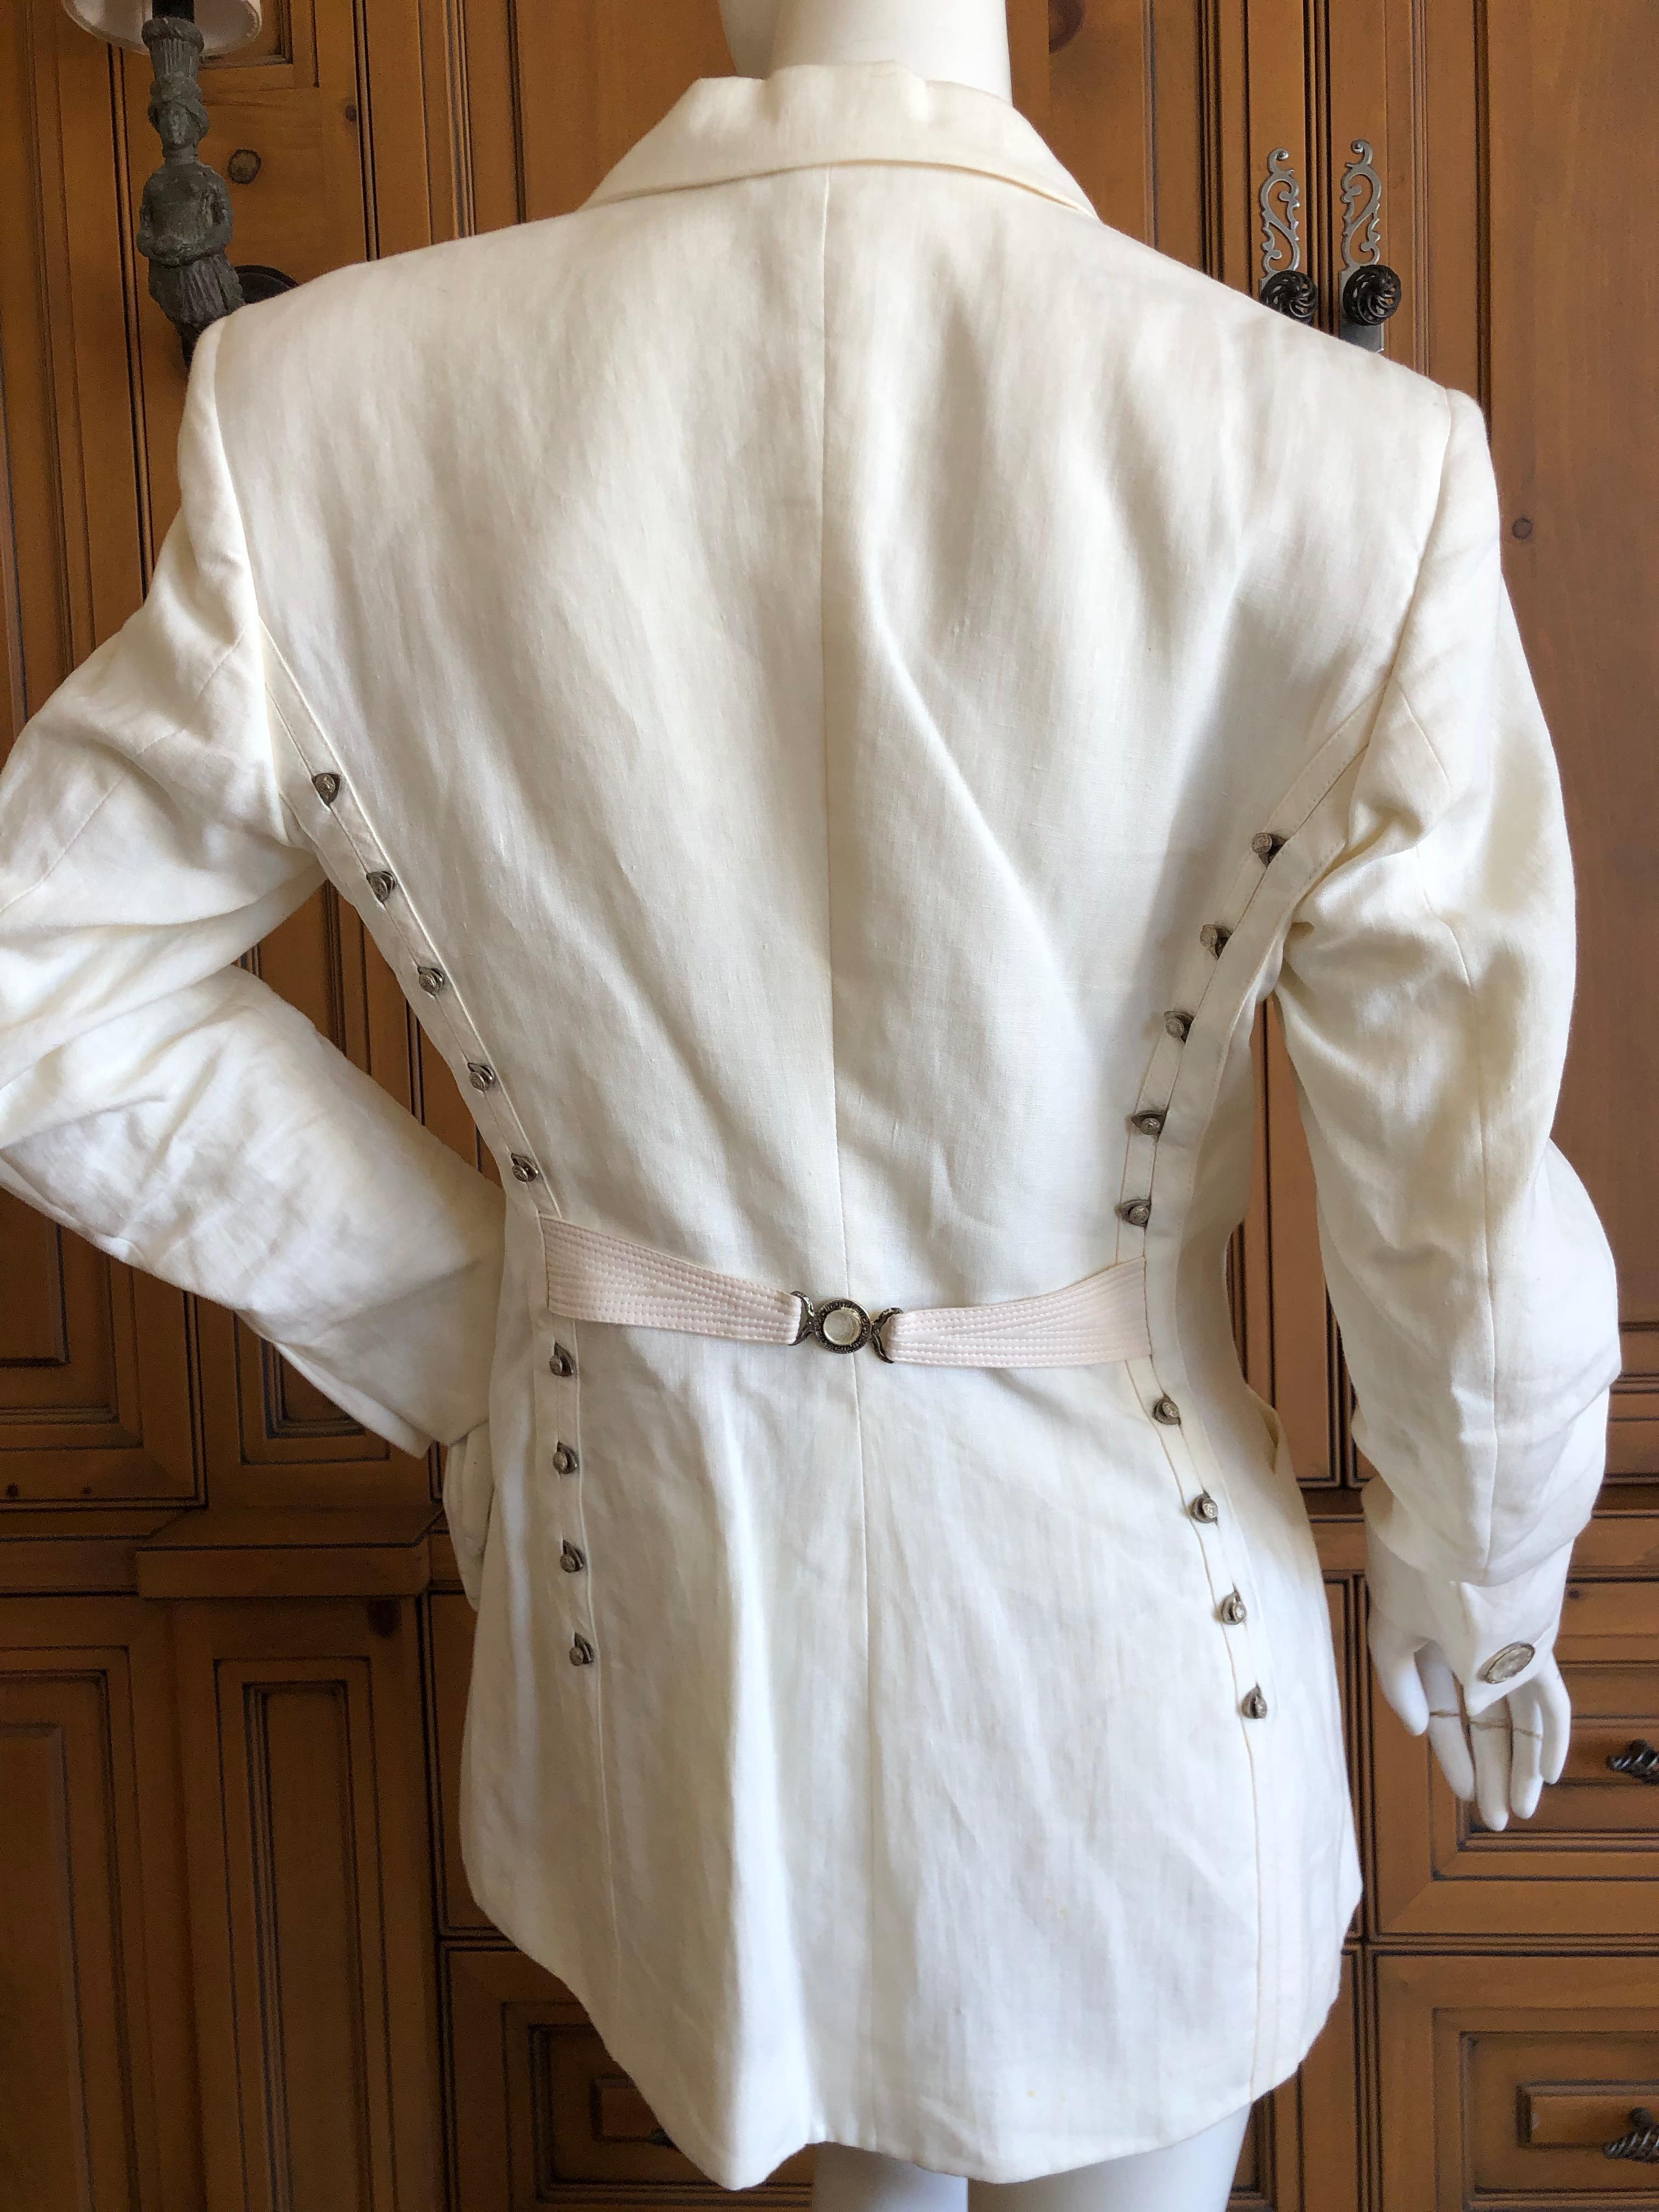 Gianni Versace Couture Fall 1992 Ivory Linen Tuxedo Suit w Corset Stay Details For Sale 3